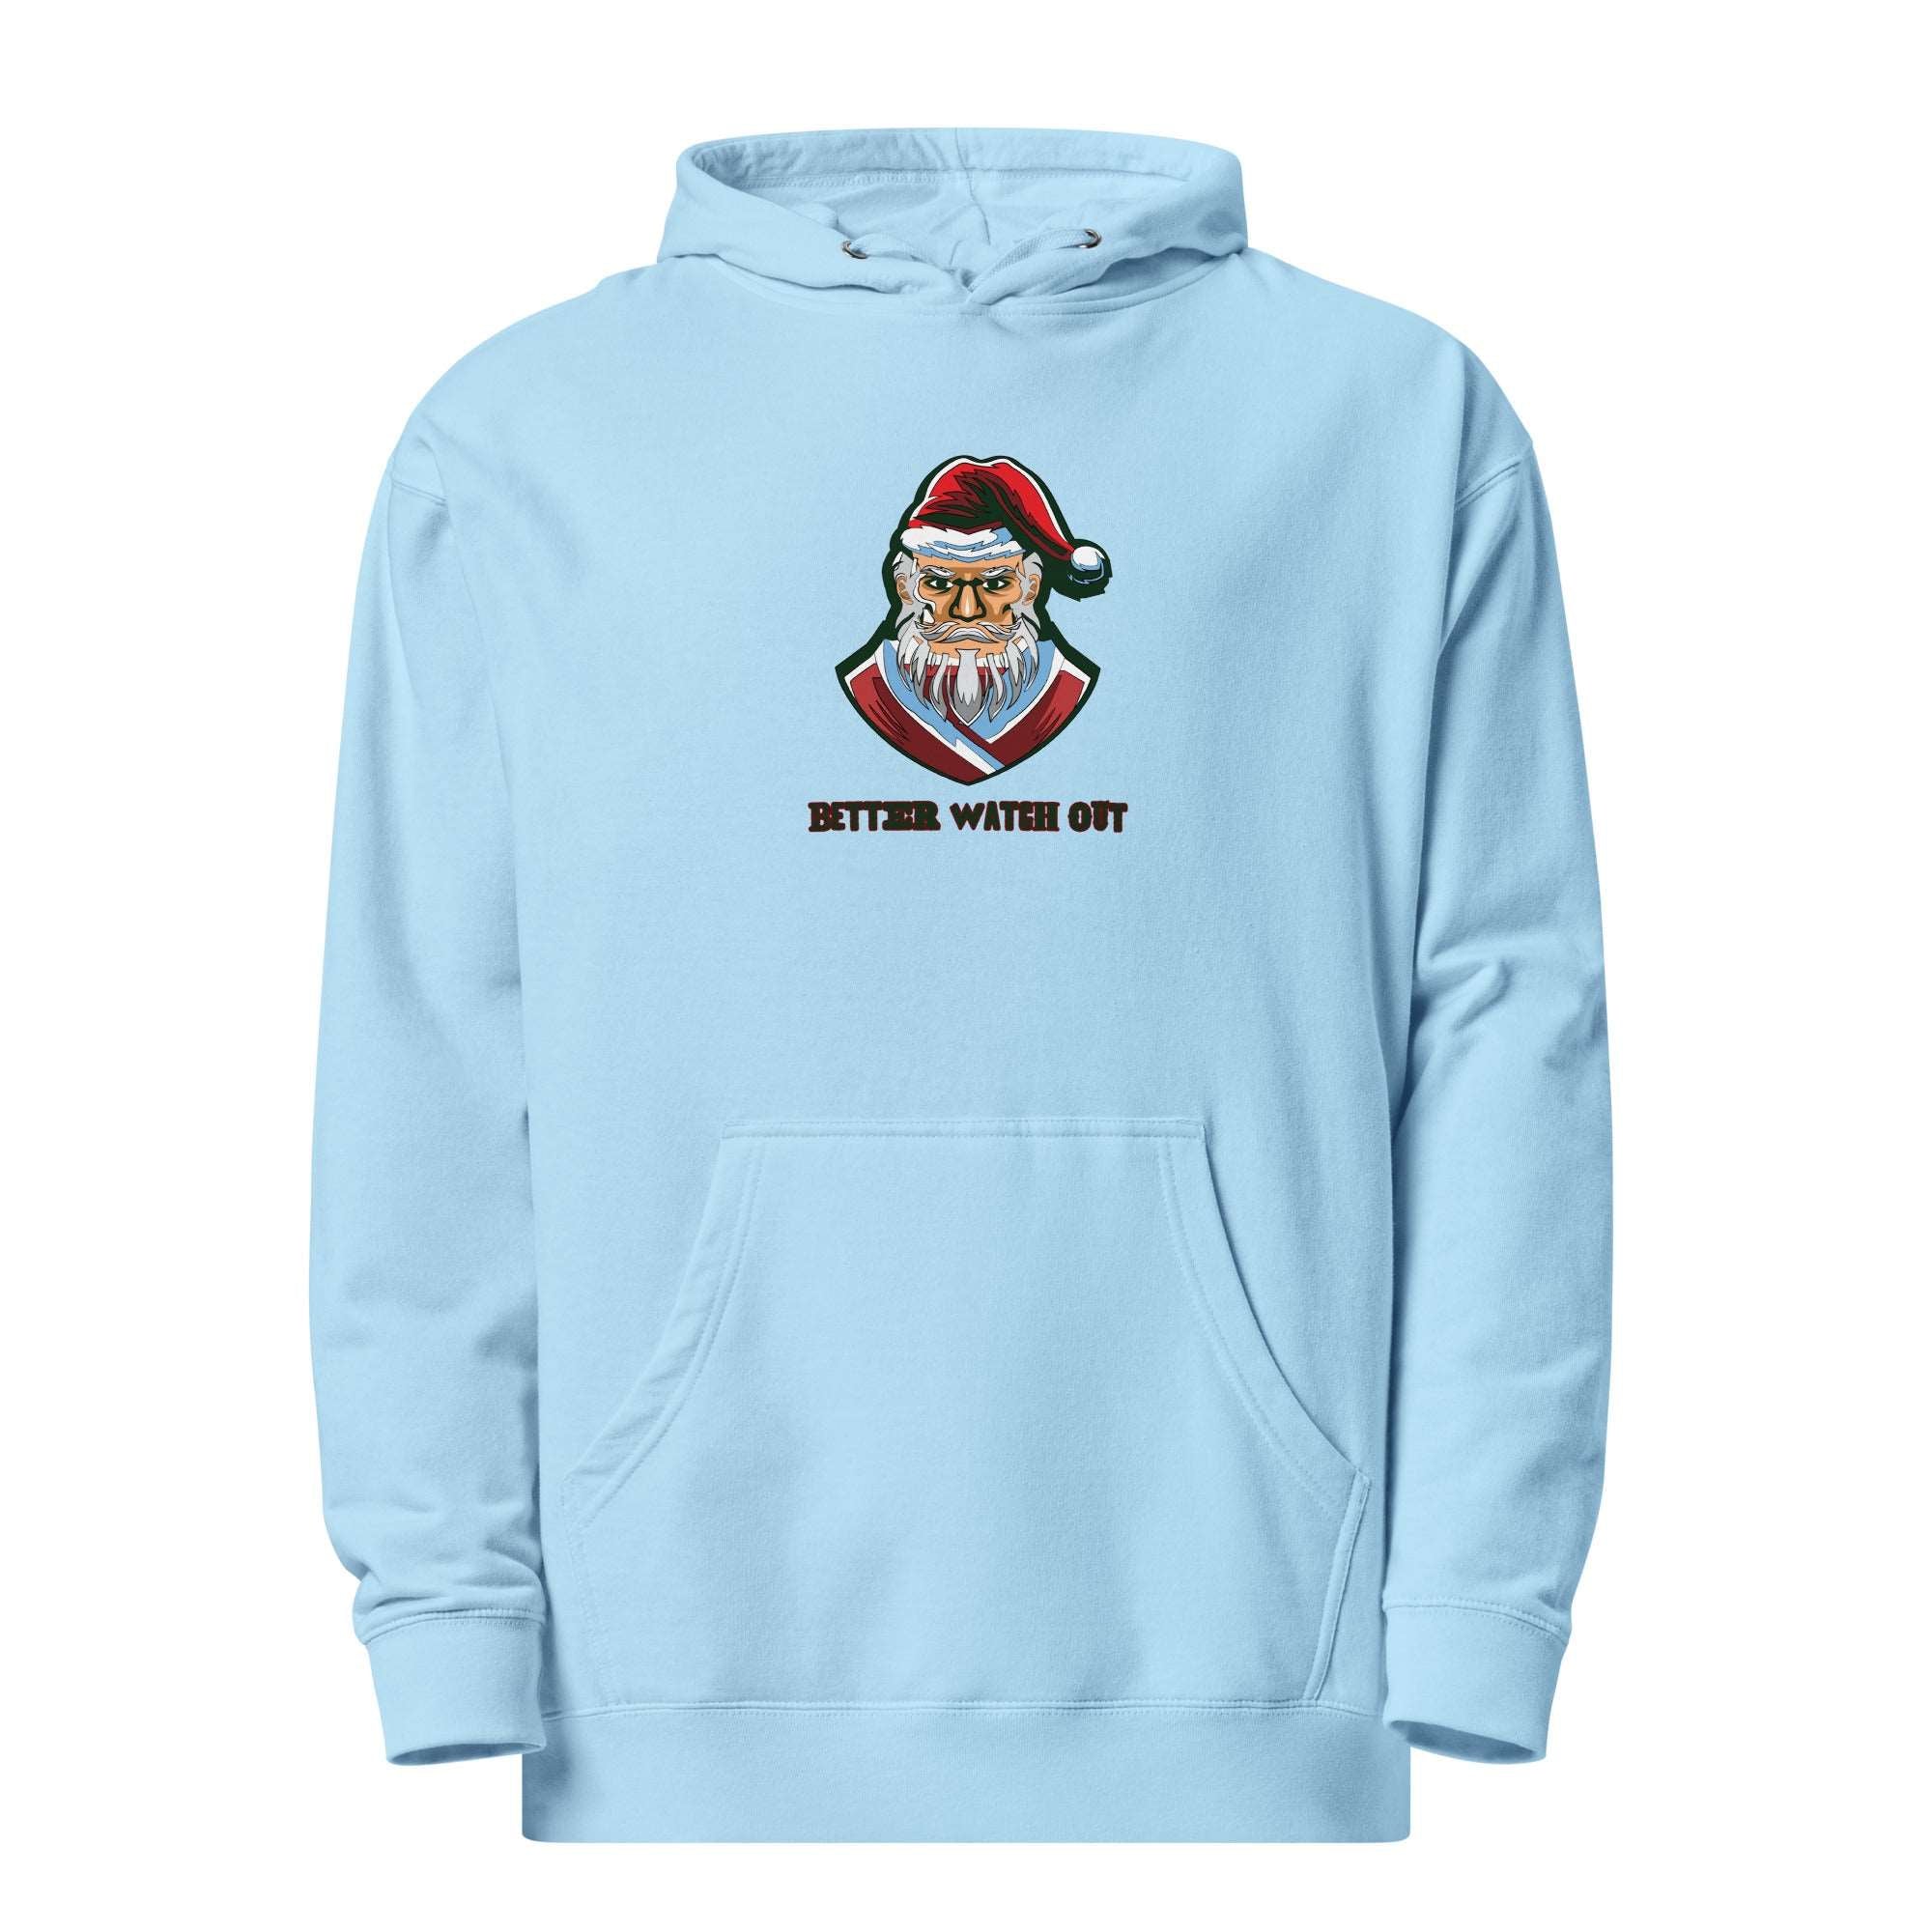 Better Watch Out Unisex midweight hoodie